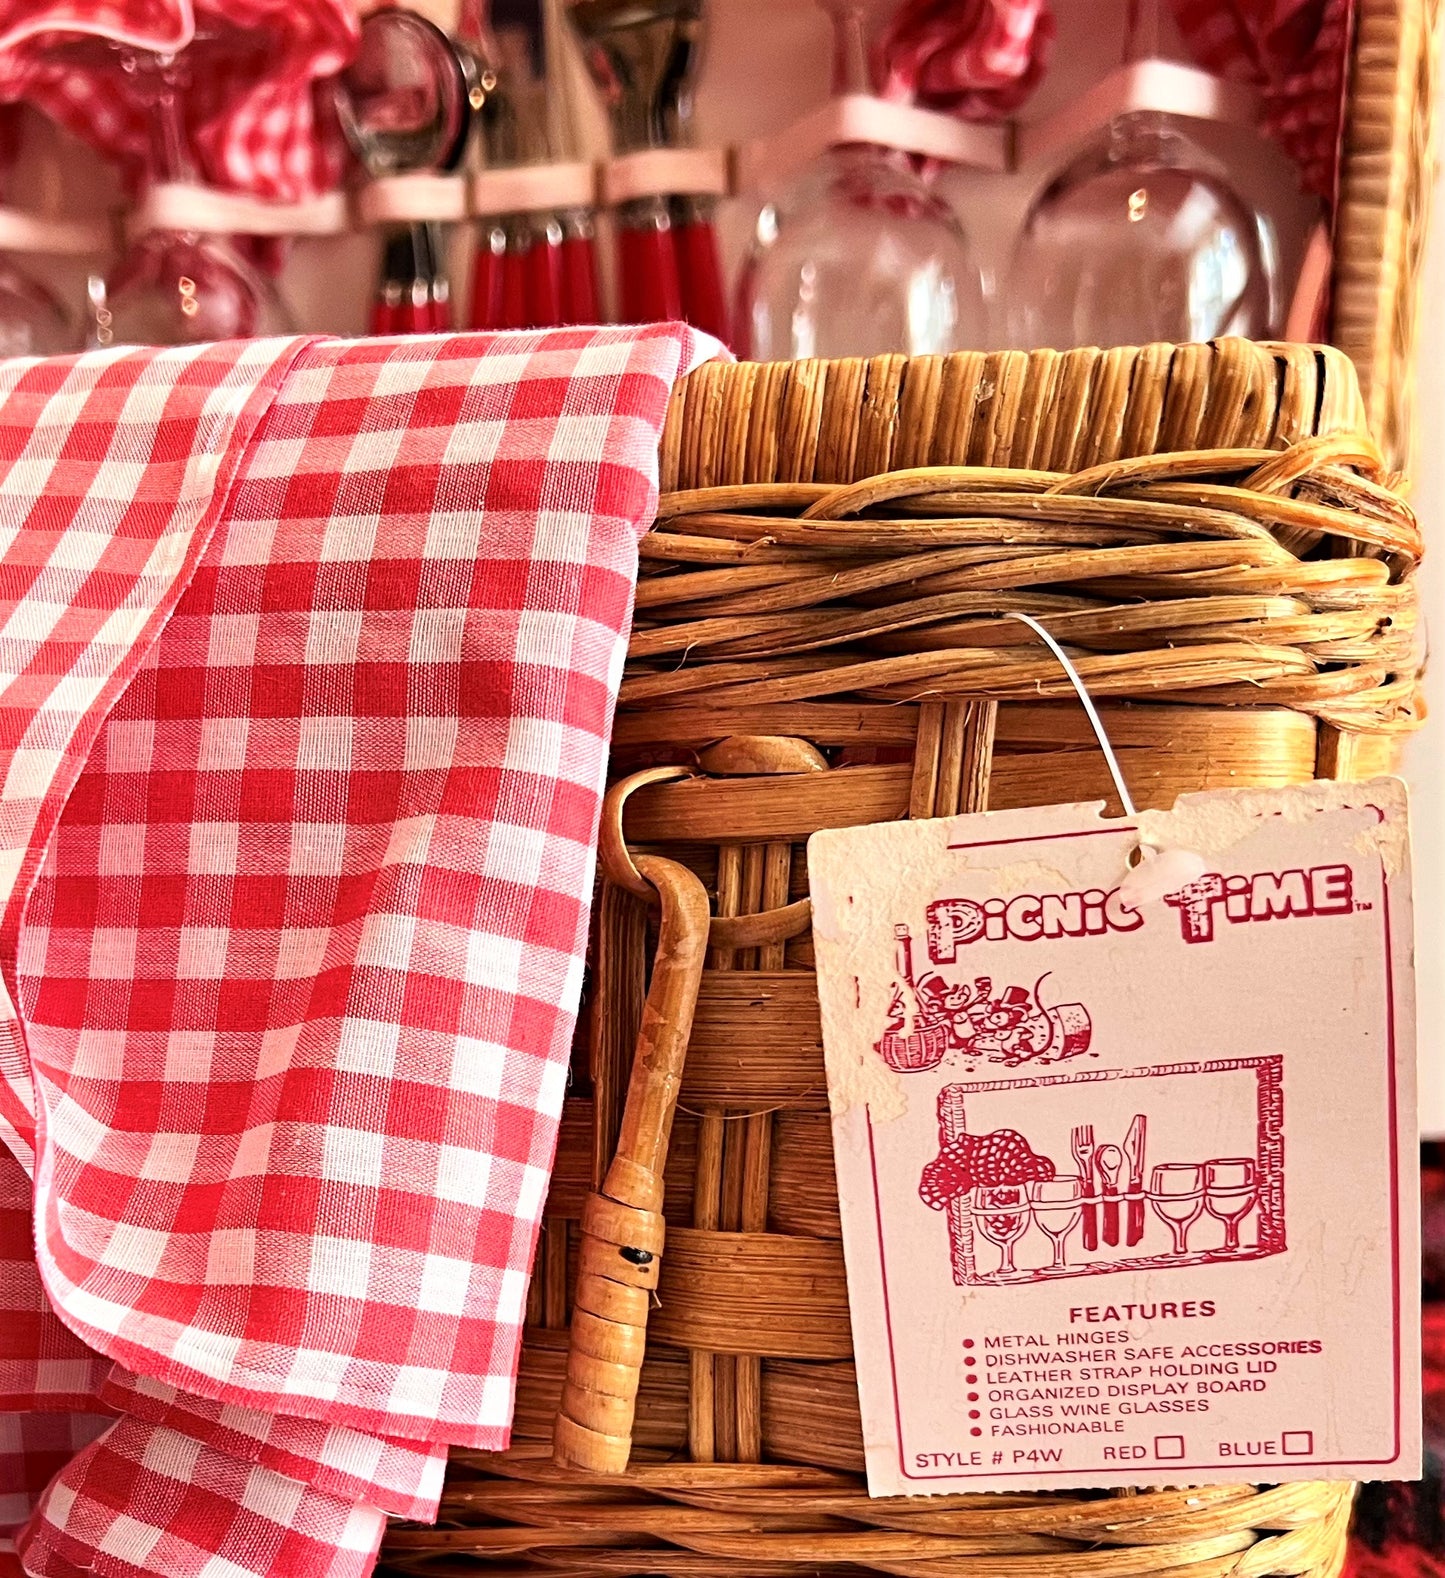 Picnic Basket Set with Red and White Gingham, 1980s by Picnic Time with Original Tag